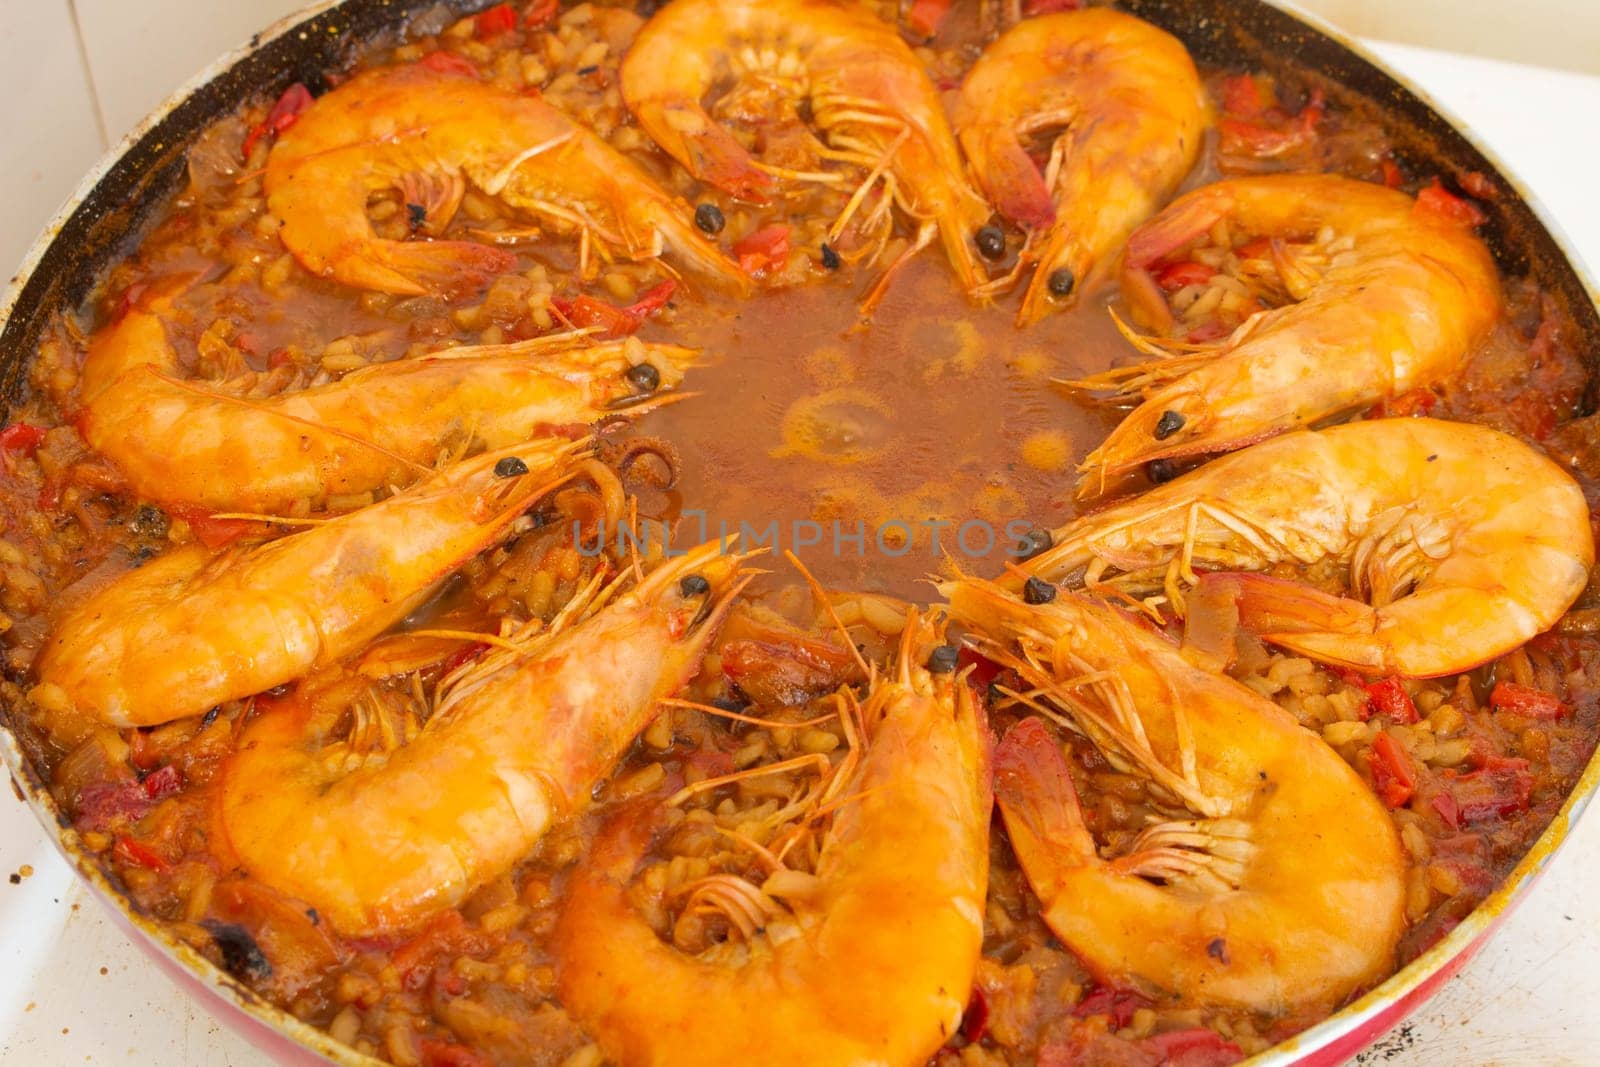 Experience culinary harmony as golden-fried shrimp rejoins the vibrant medley of flavors in the traditional Spanish paella, enriching each bite with savory delight